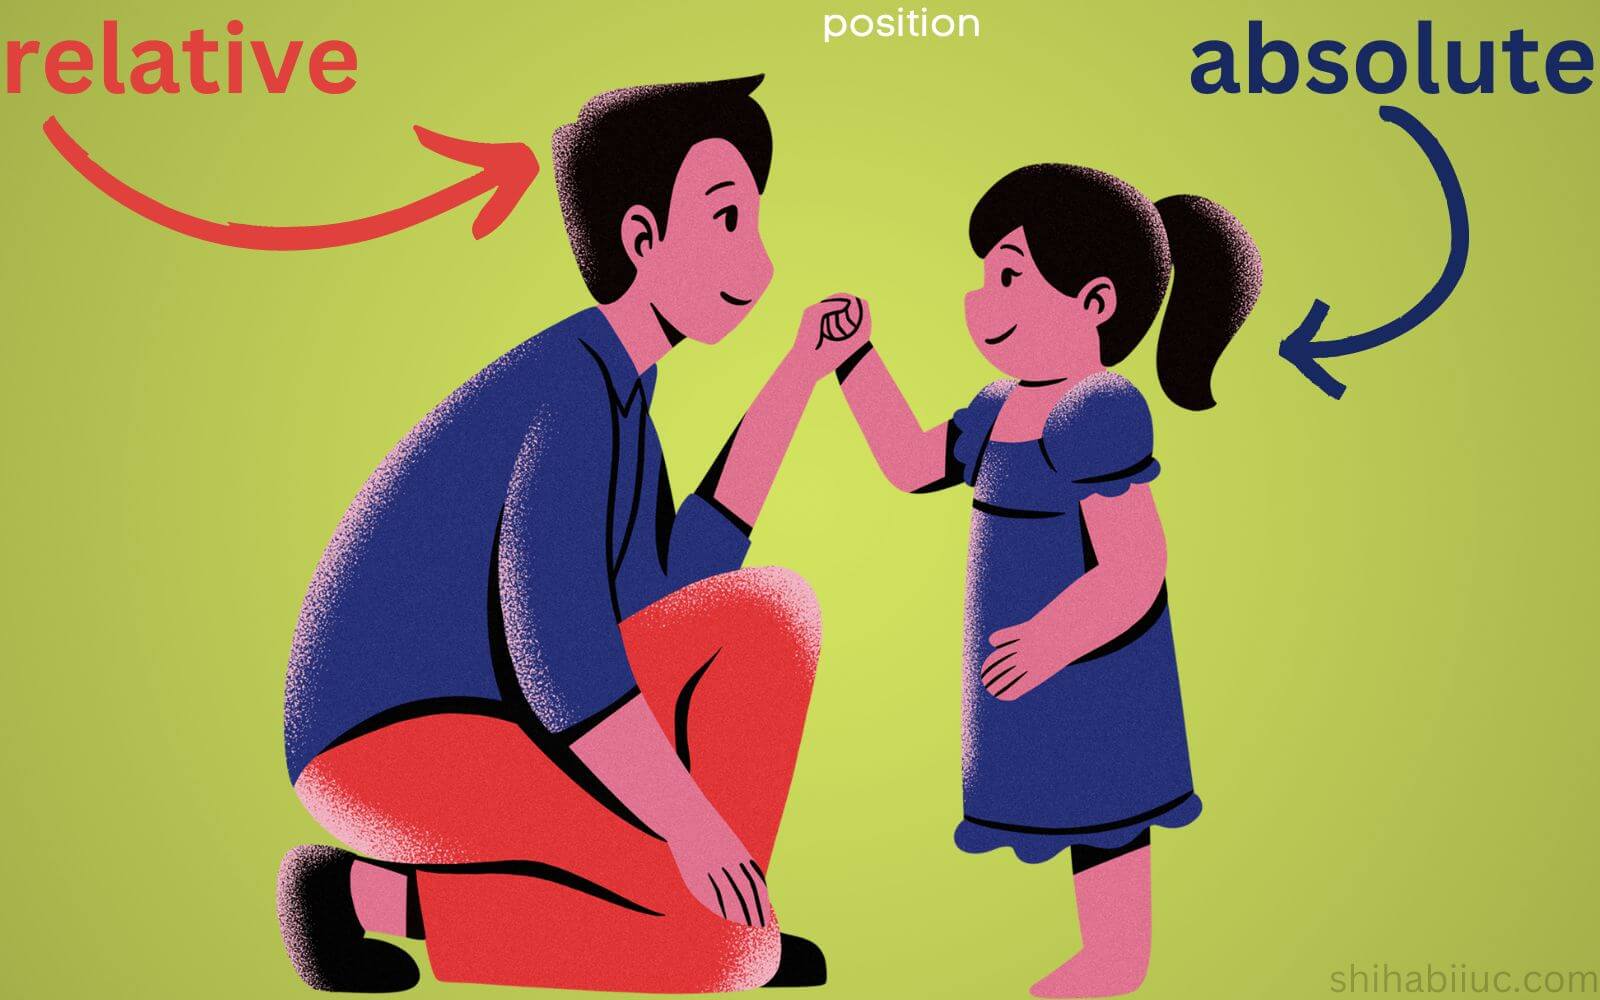 position relative & absolute infographic using a father & daughter relation